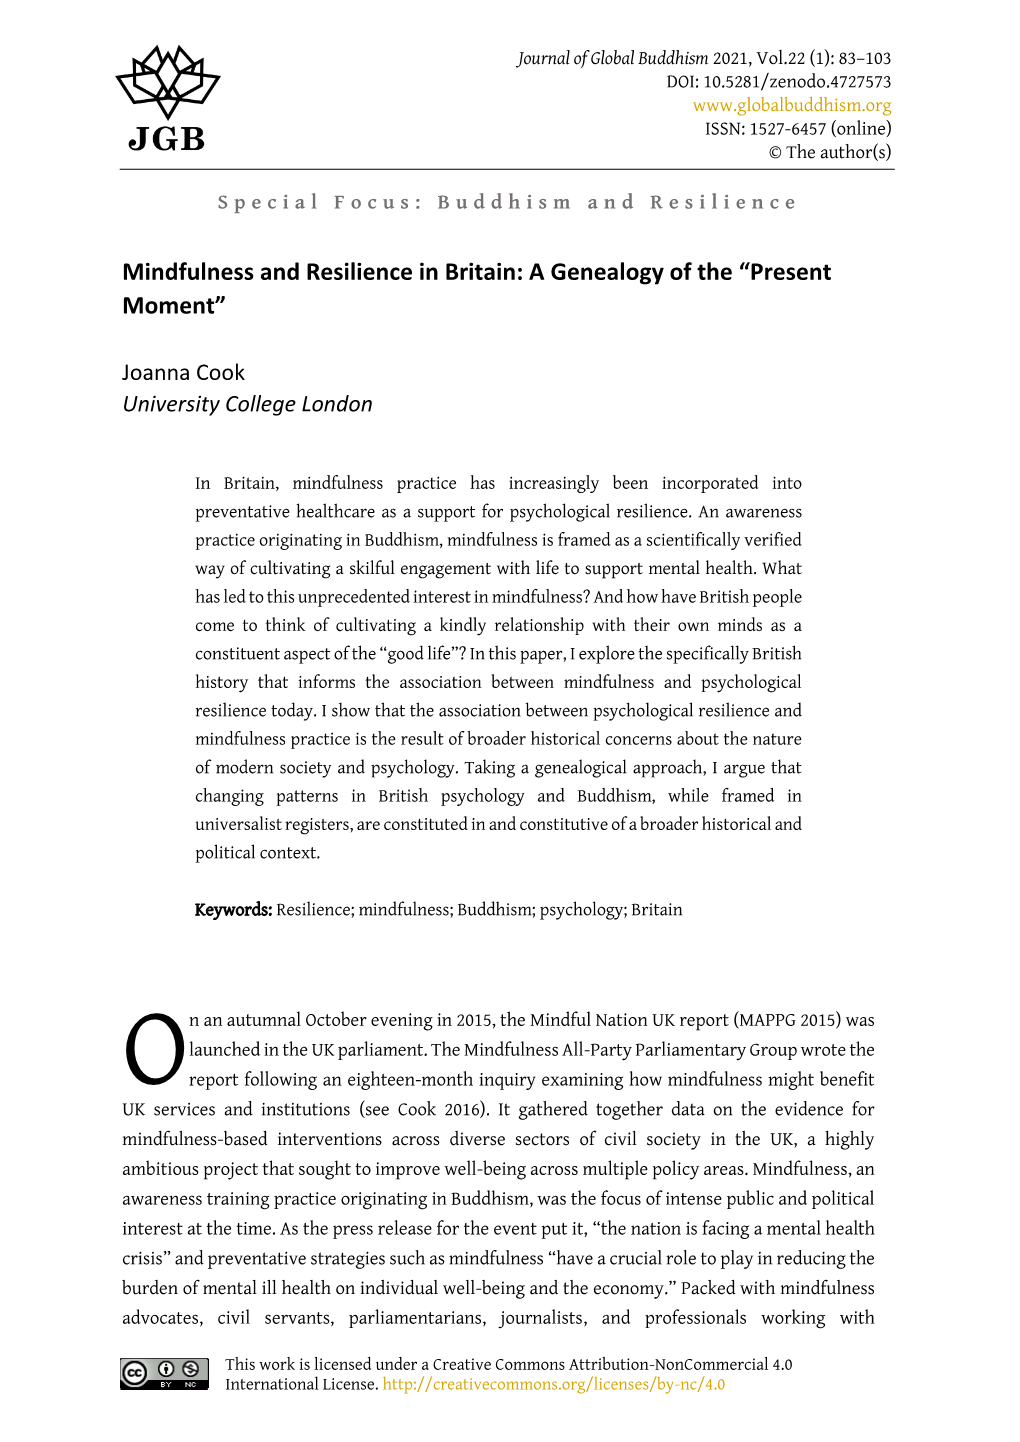 Mindfulness and Resilience in Britain: a Genealogy of the “Present Moment”